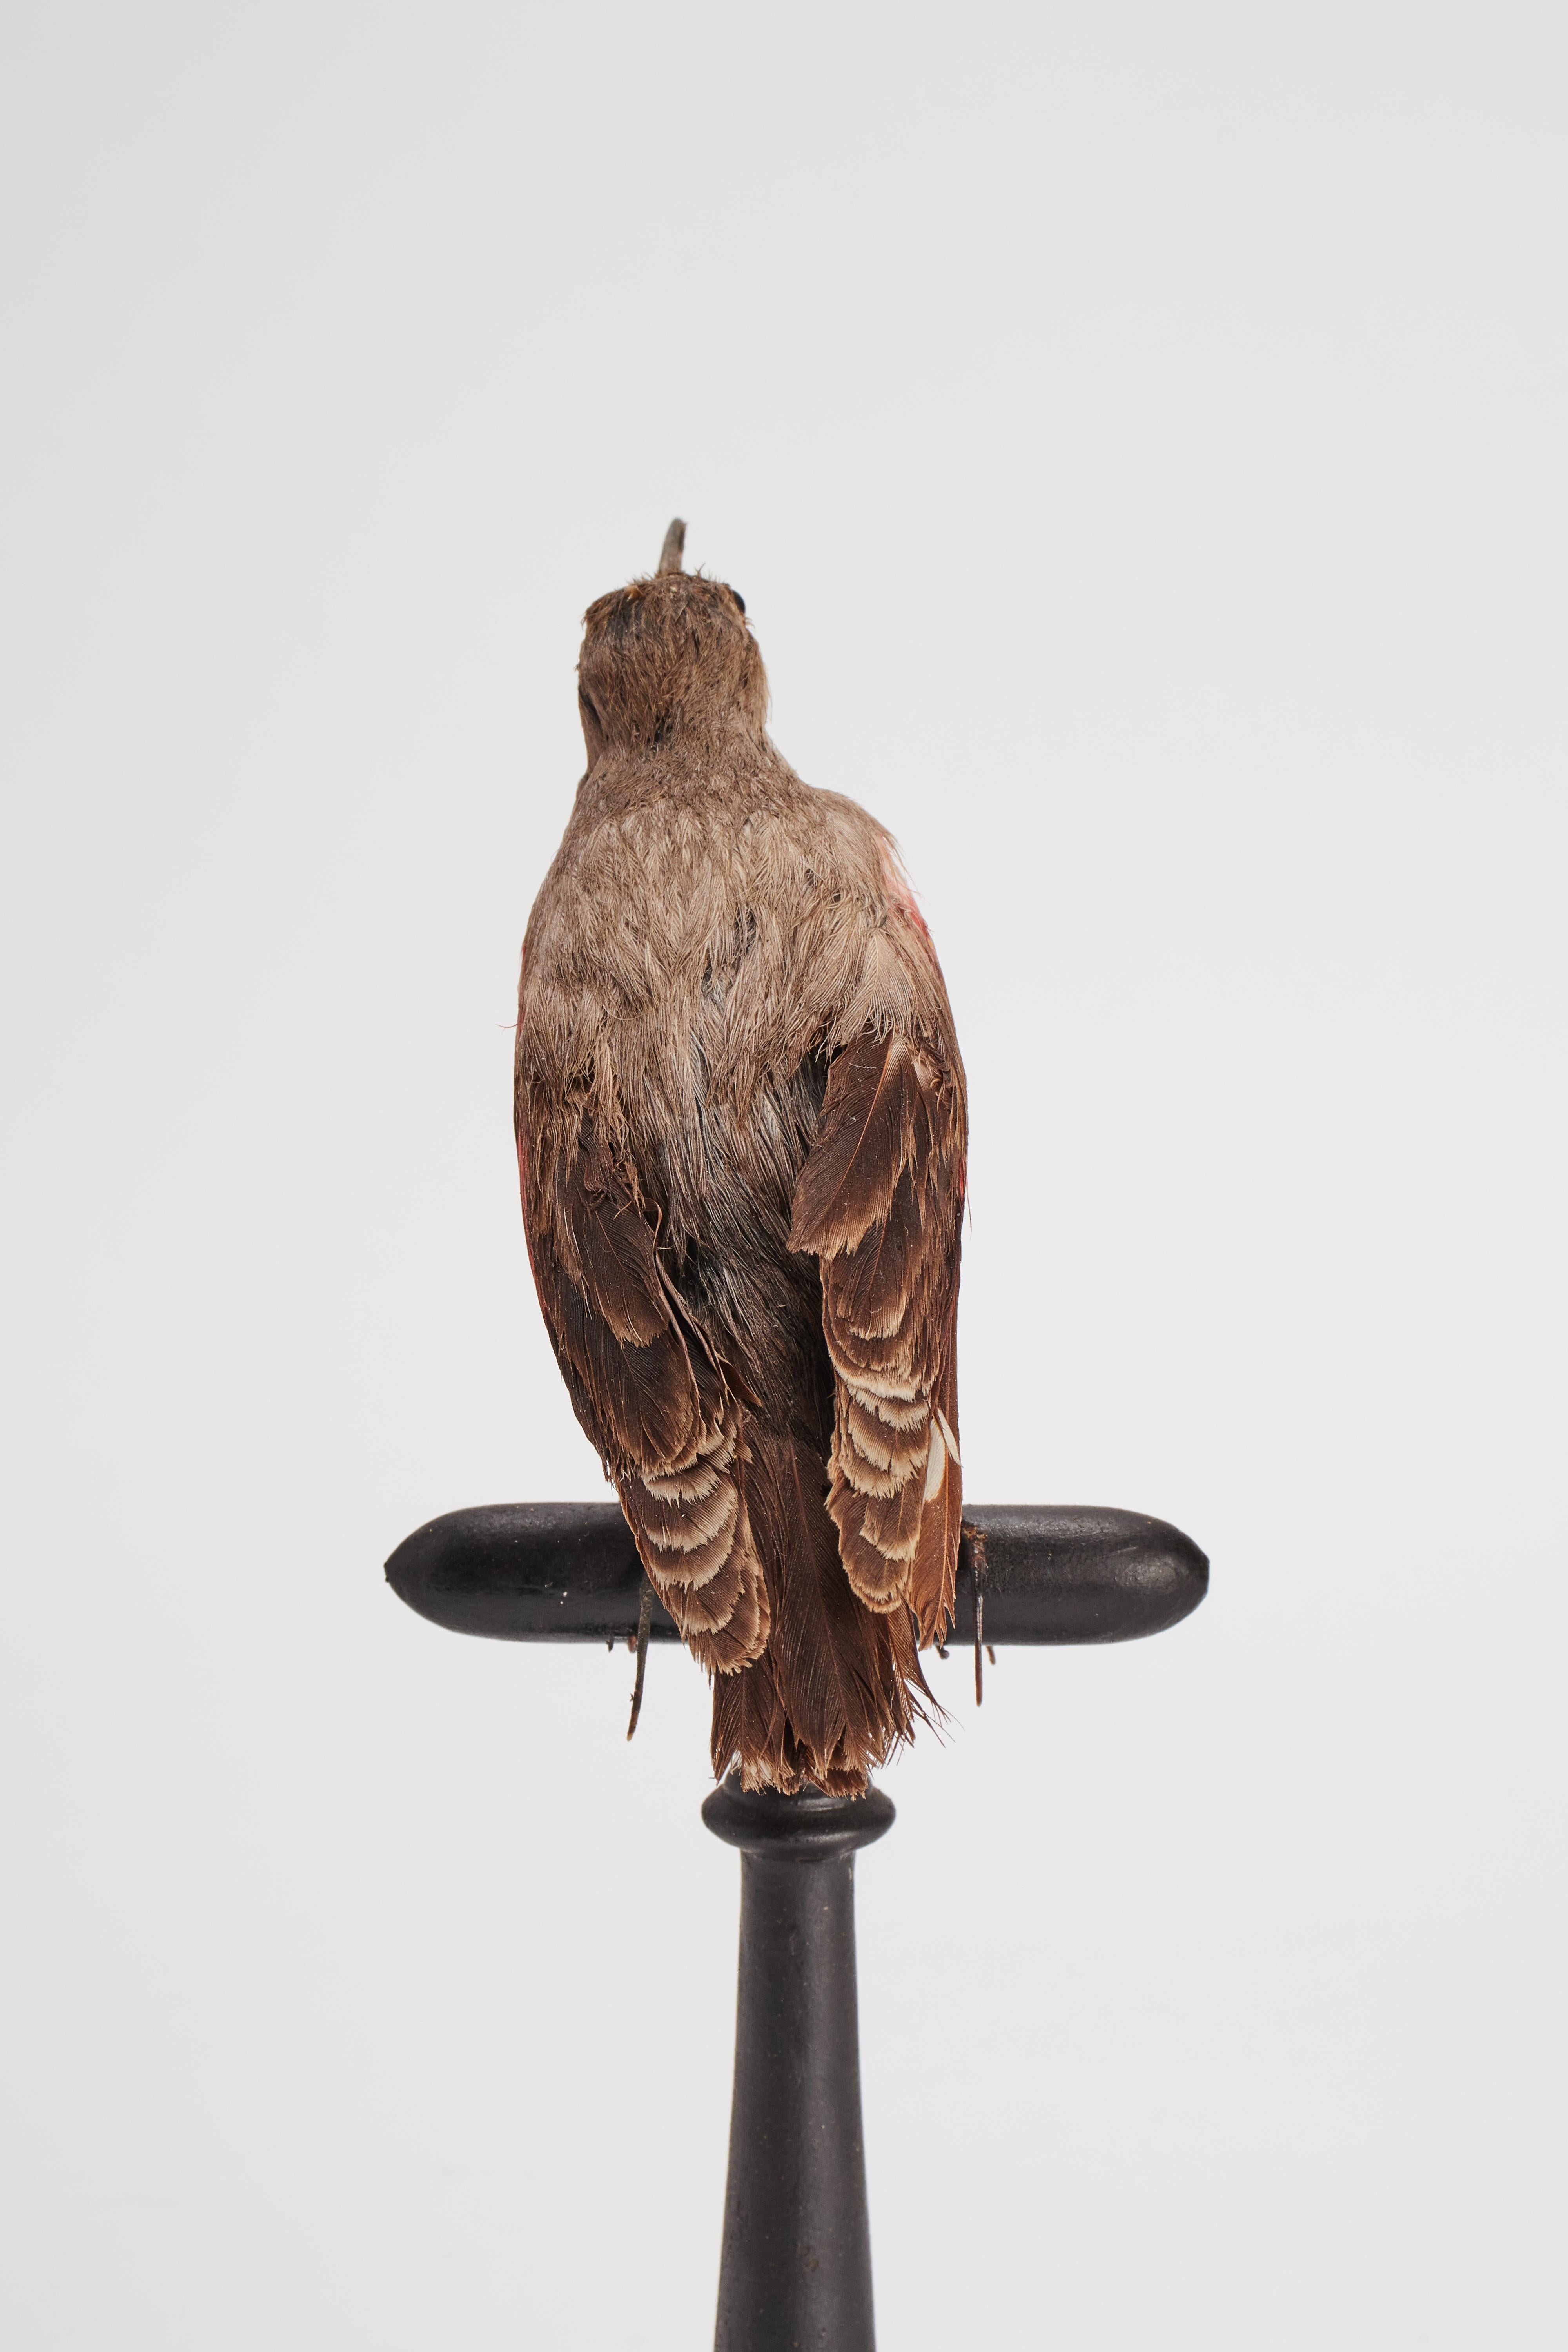 Fruitwood Stuffed bird: (Tichodroma muraria), for natural history cabinet, Italy 1880. For Sale